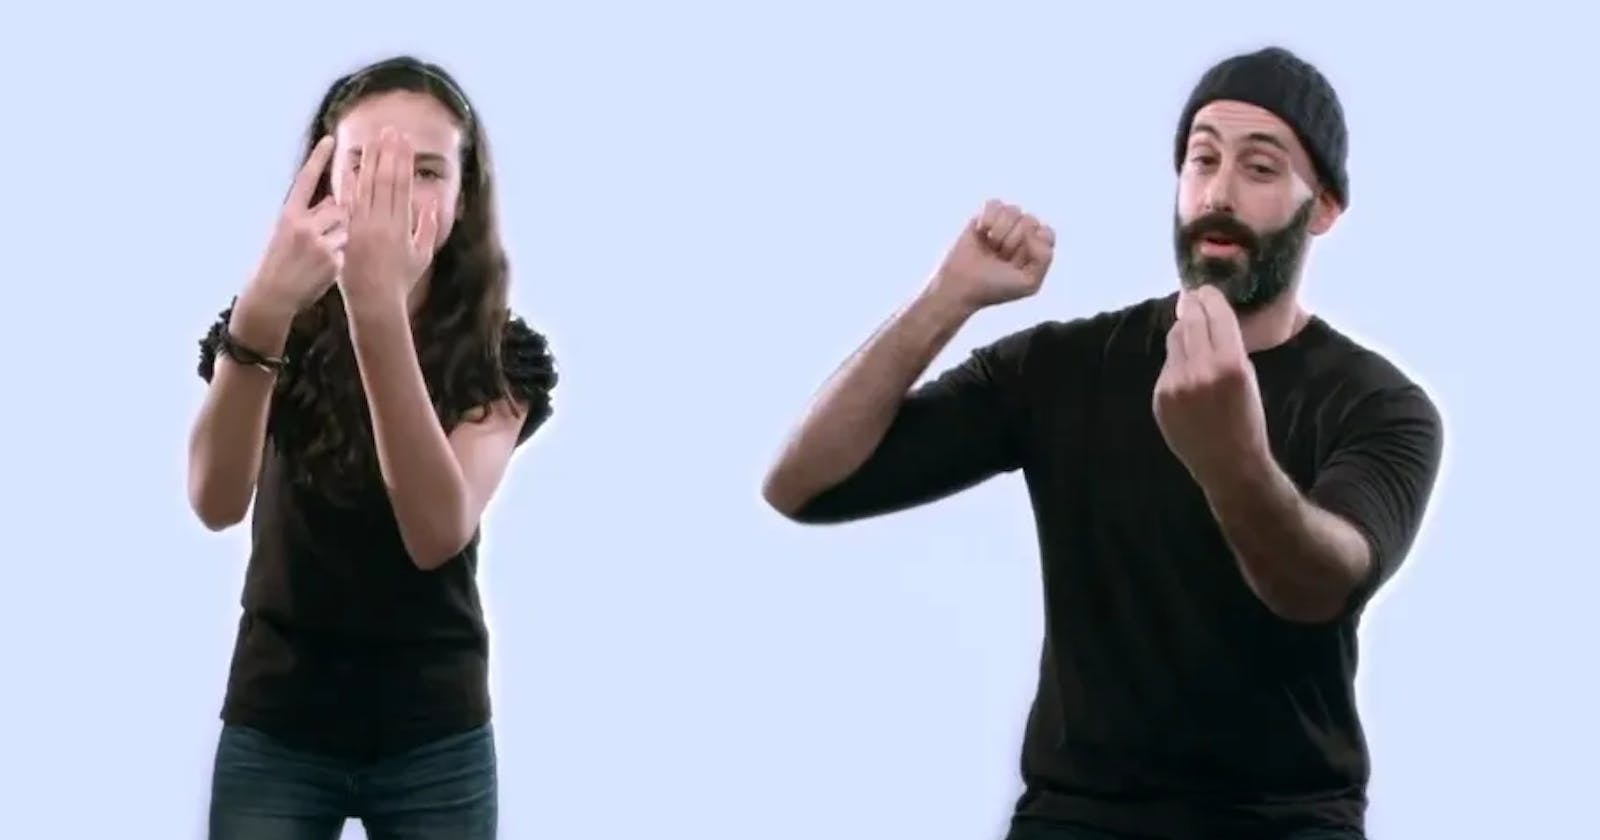 Decoding 'Stupid' in Sign Language: Explore with Video & Image